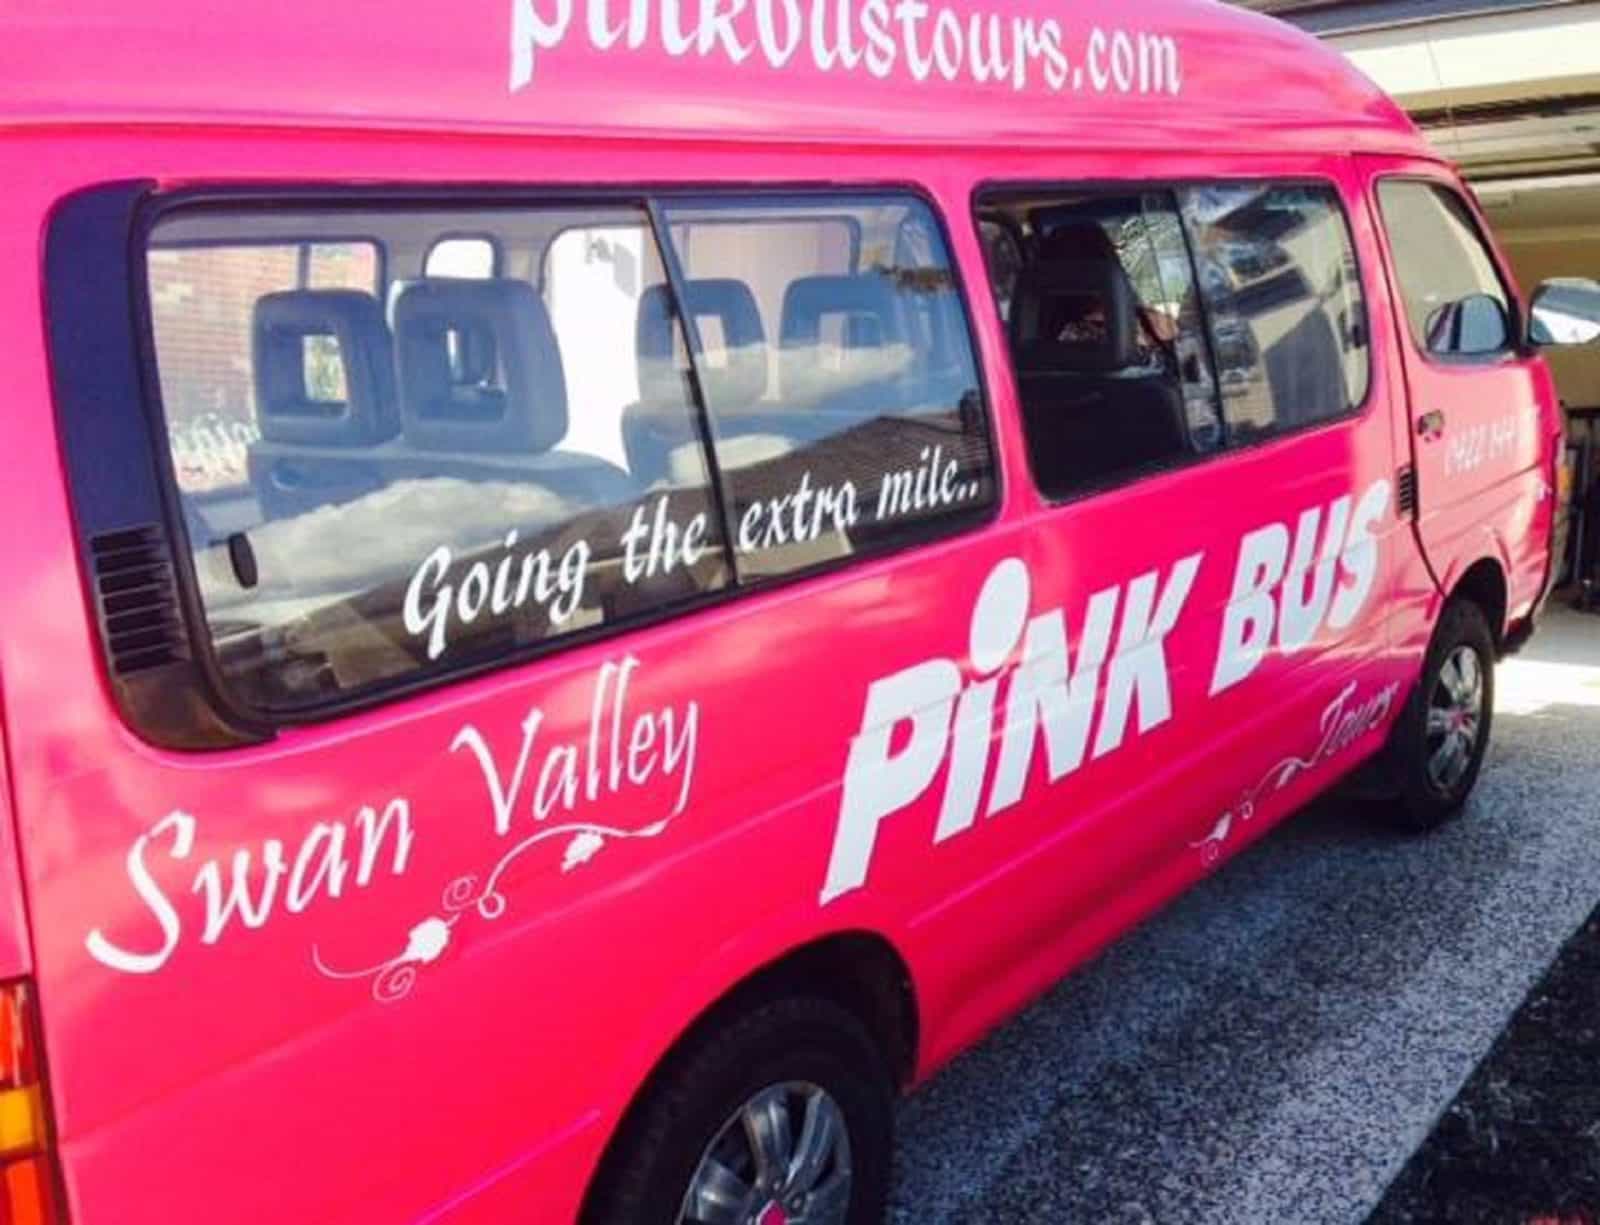 Pink Bus and Limousine Tours, Swan Valley, Western Australia